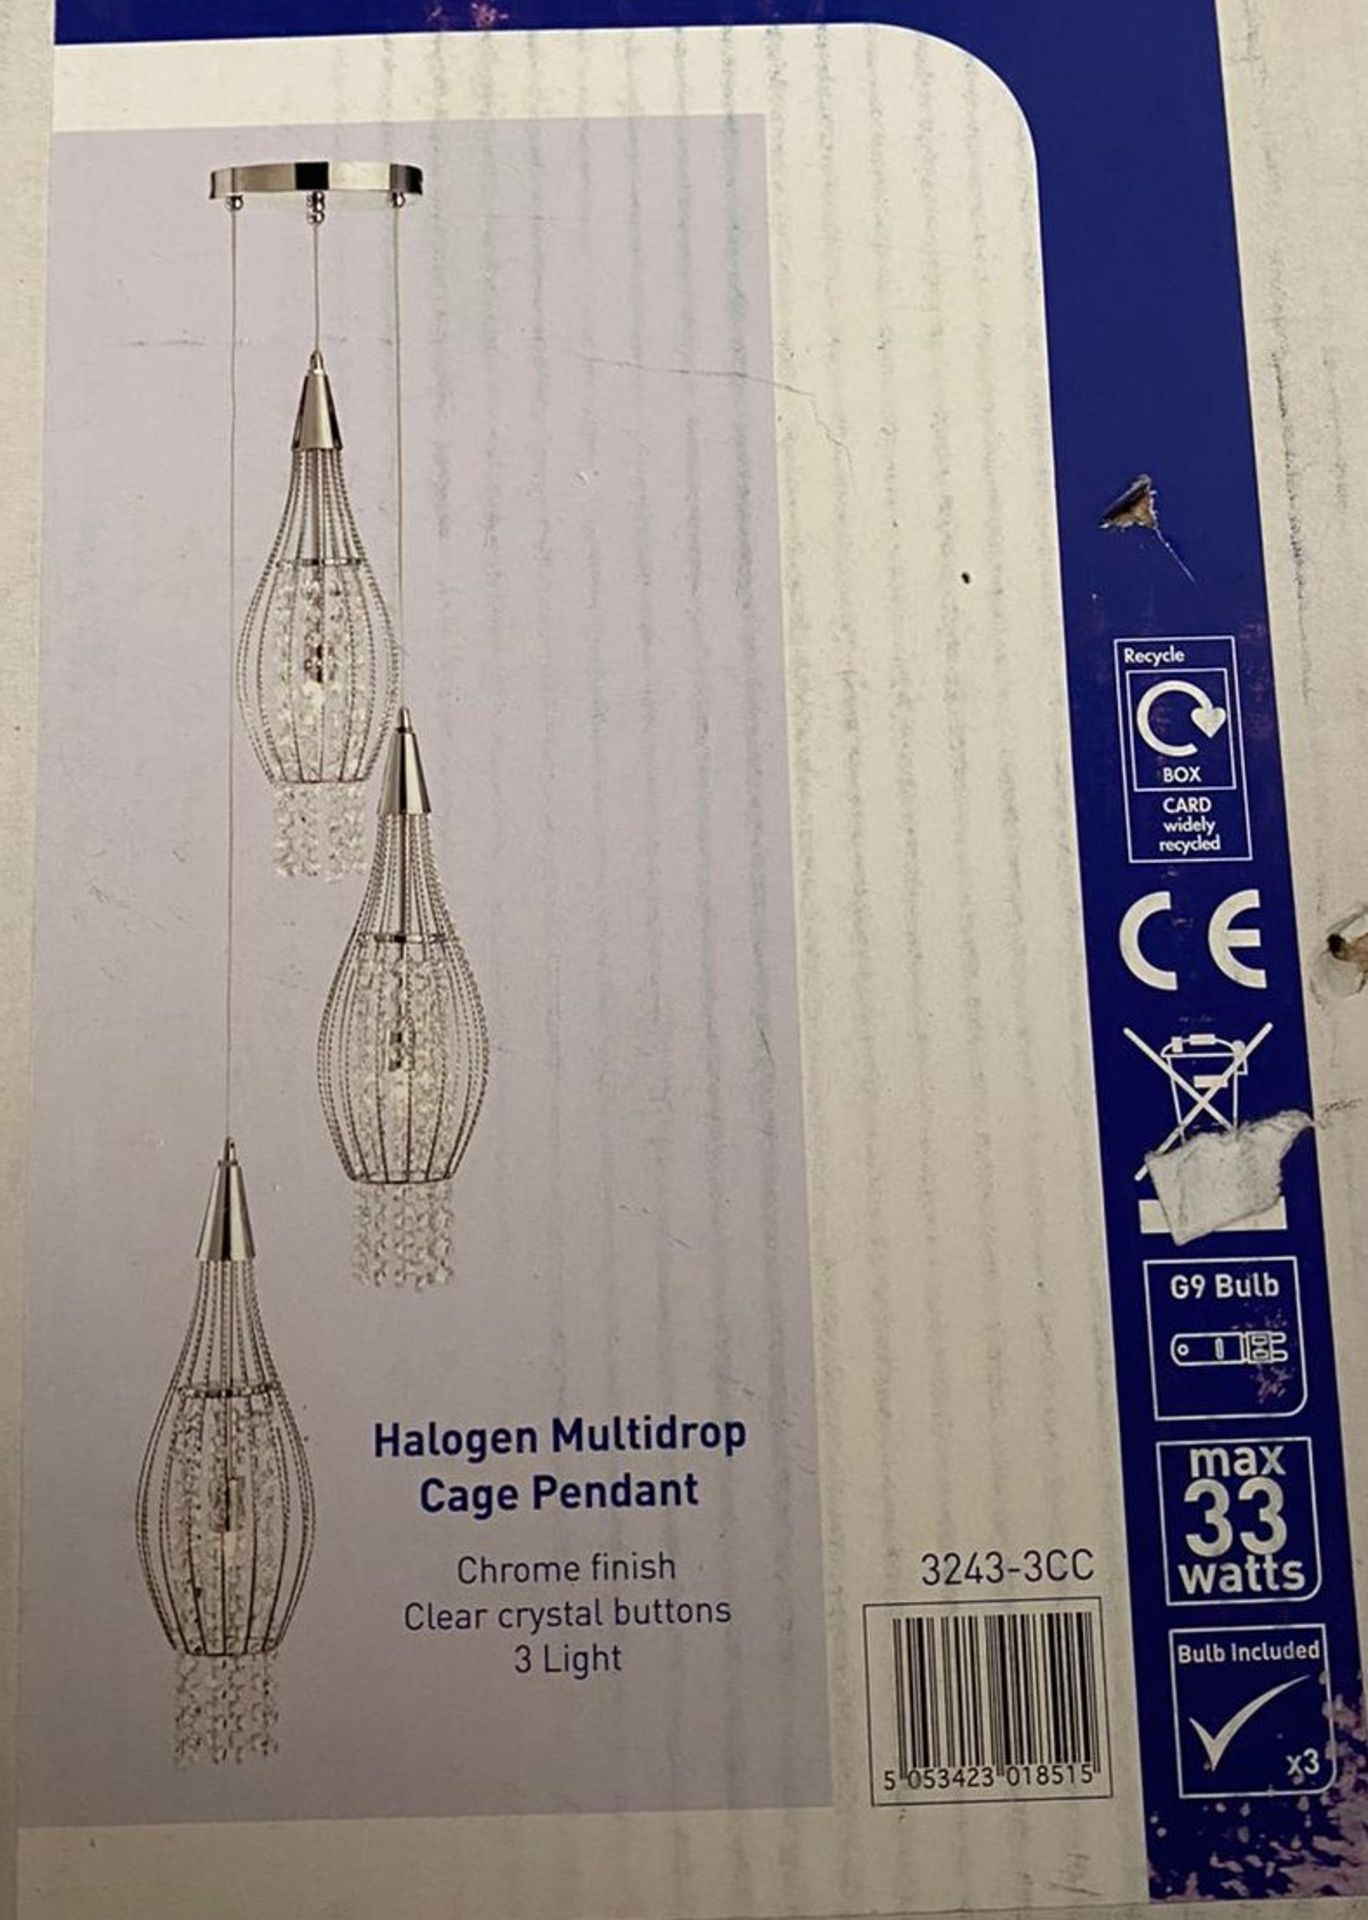 1 x Searchlight Halogen Multidrop Cage Pendant in chrome - Ref: 3243-3CC - New and Boxed - RRP: £240